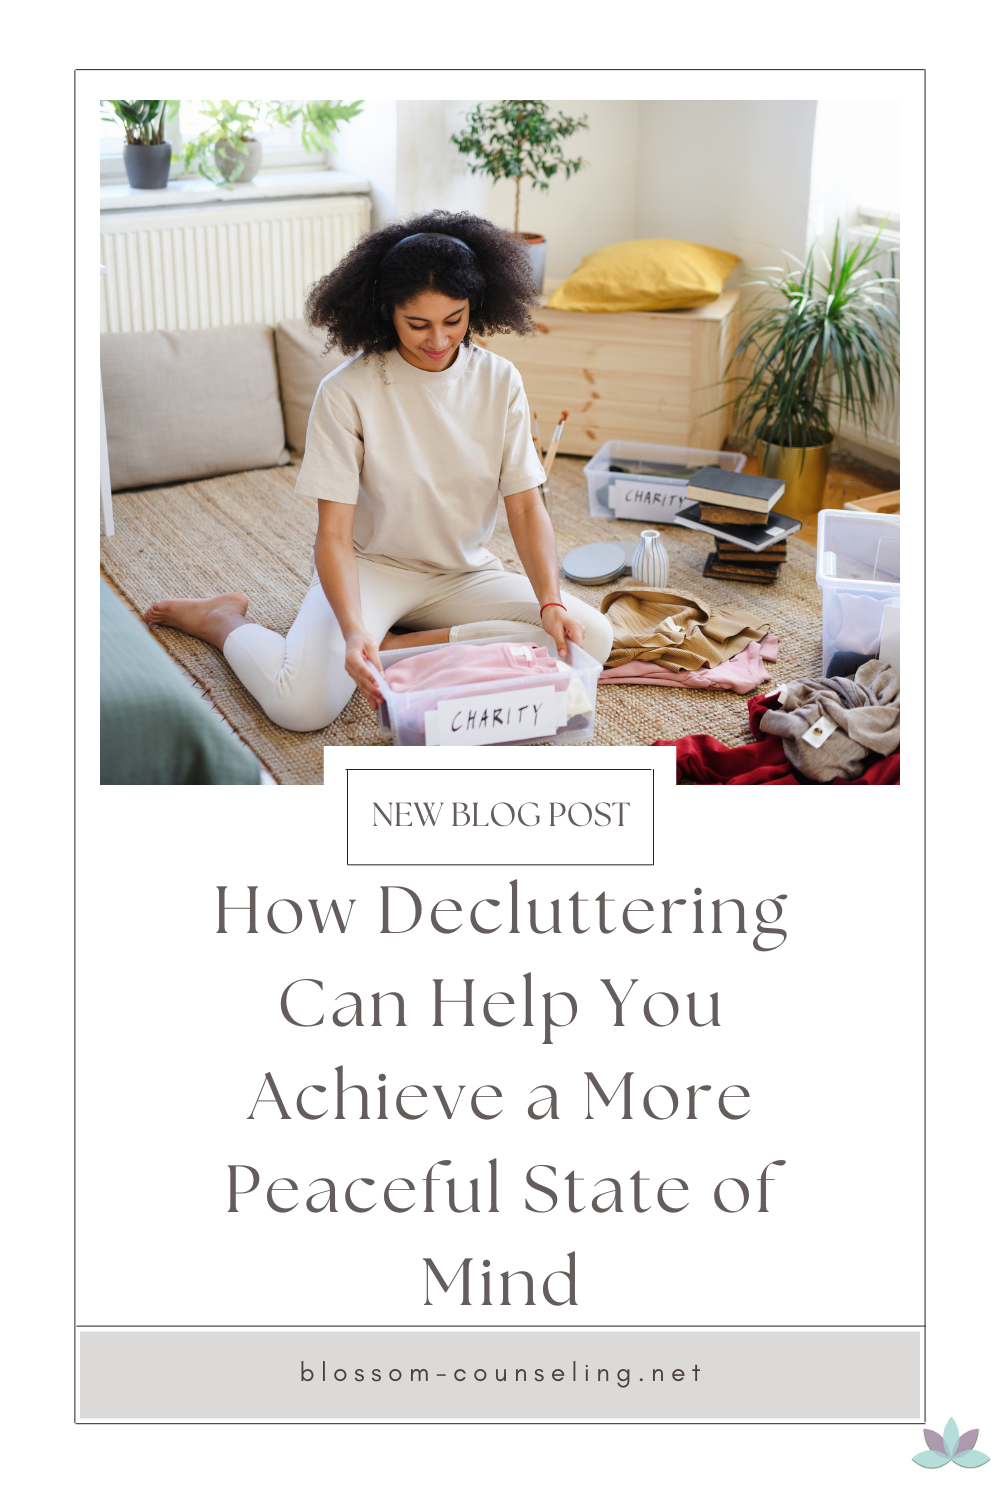 How Decluttering Can Help You Achieve a More Peaceful State of Mind